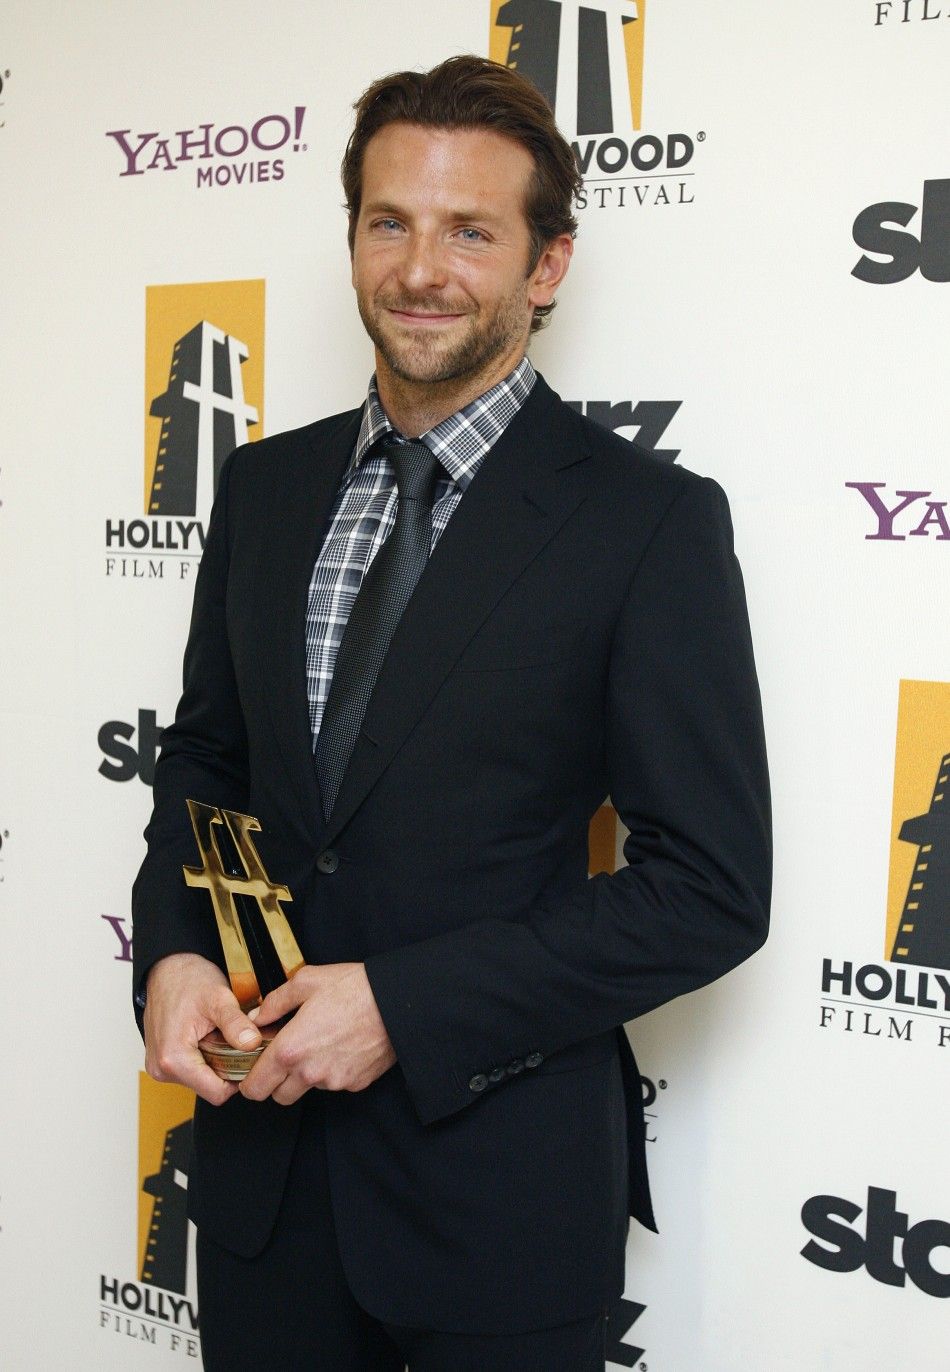 Cooper poses after accepting the Comedy Award at the 13th annual Hollywood Awards gala in Beverly Hills